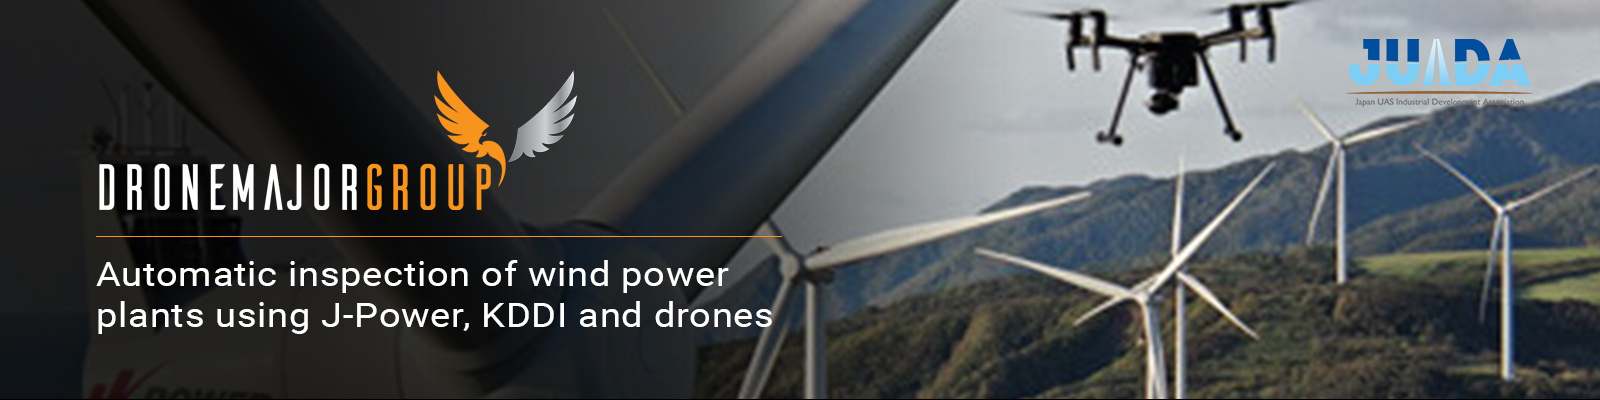 Automatic inspection of wind power plants using J-Power, KDDI and drones